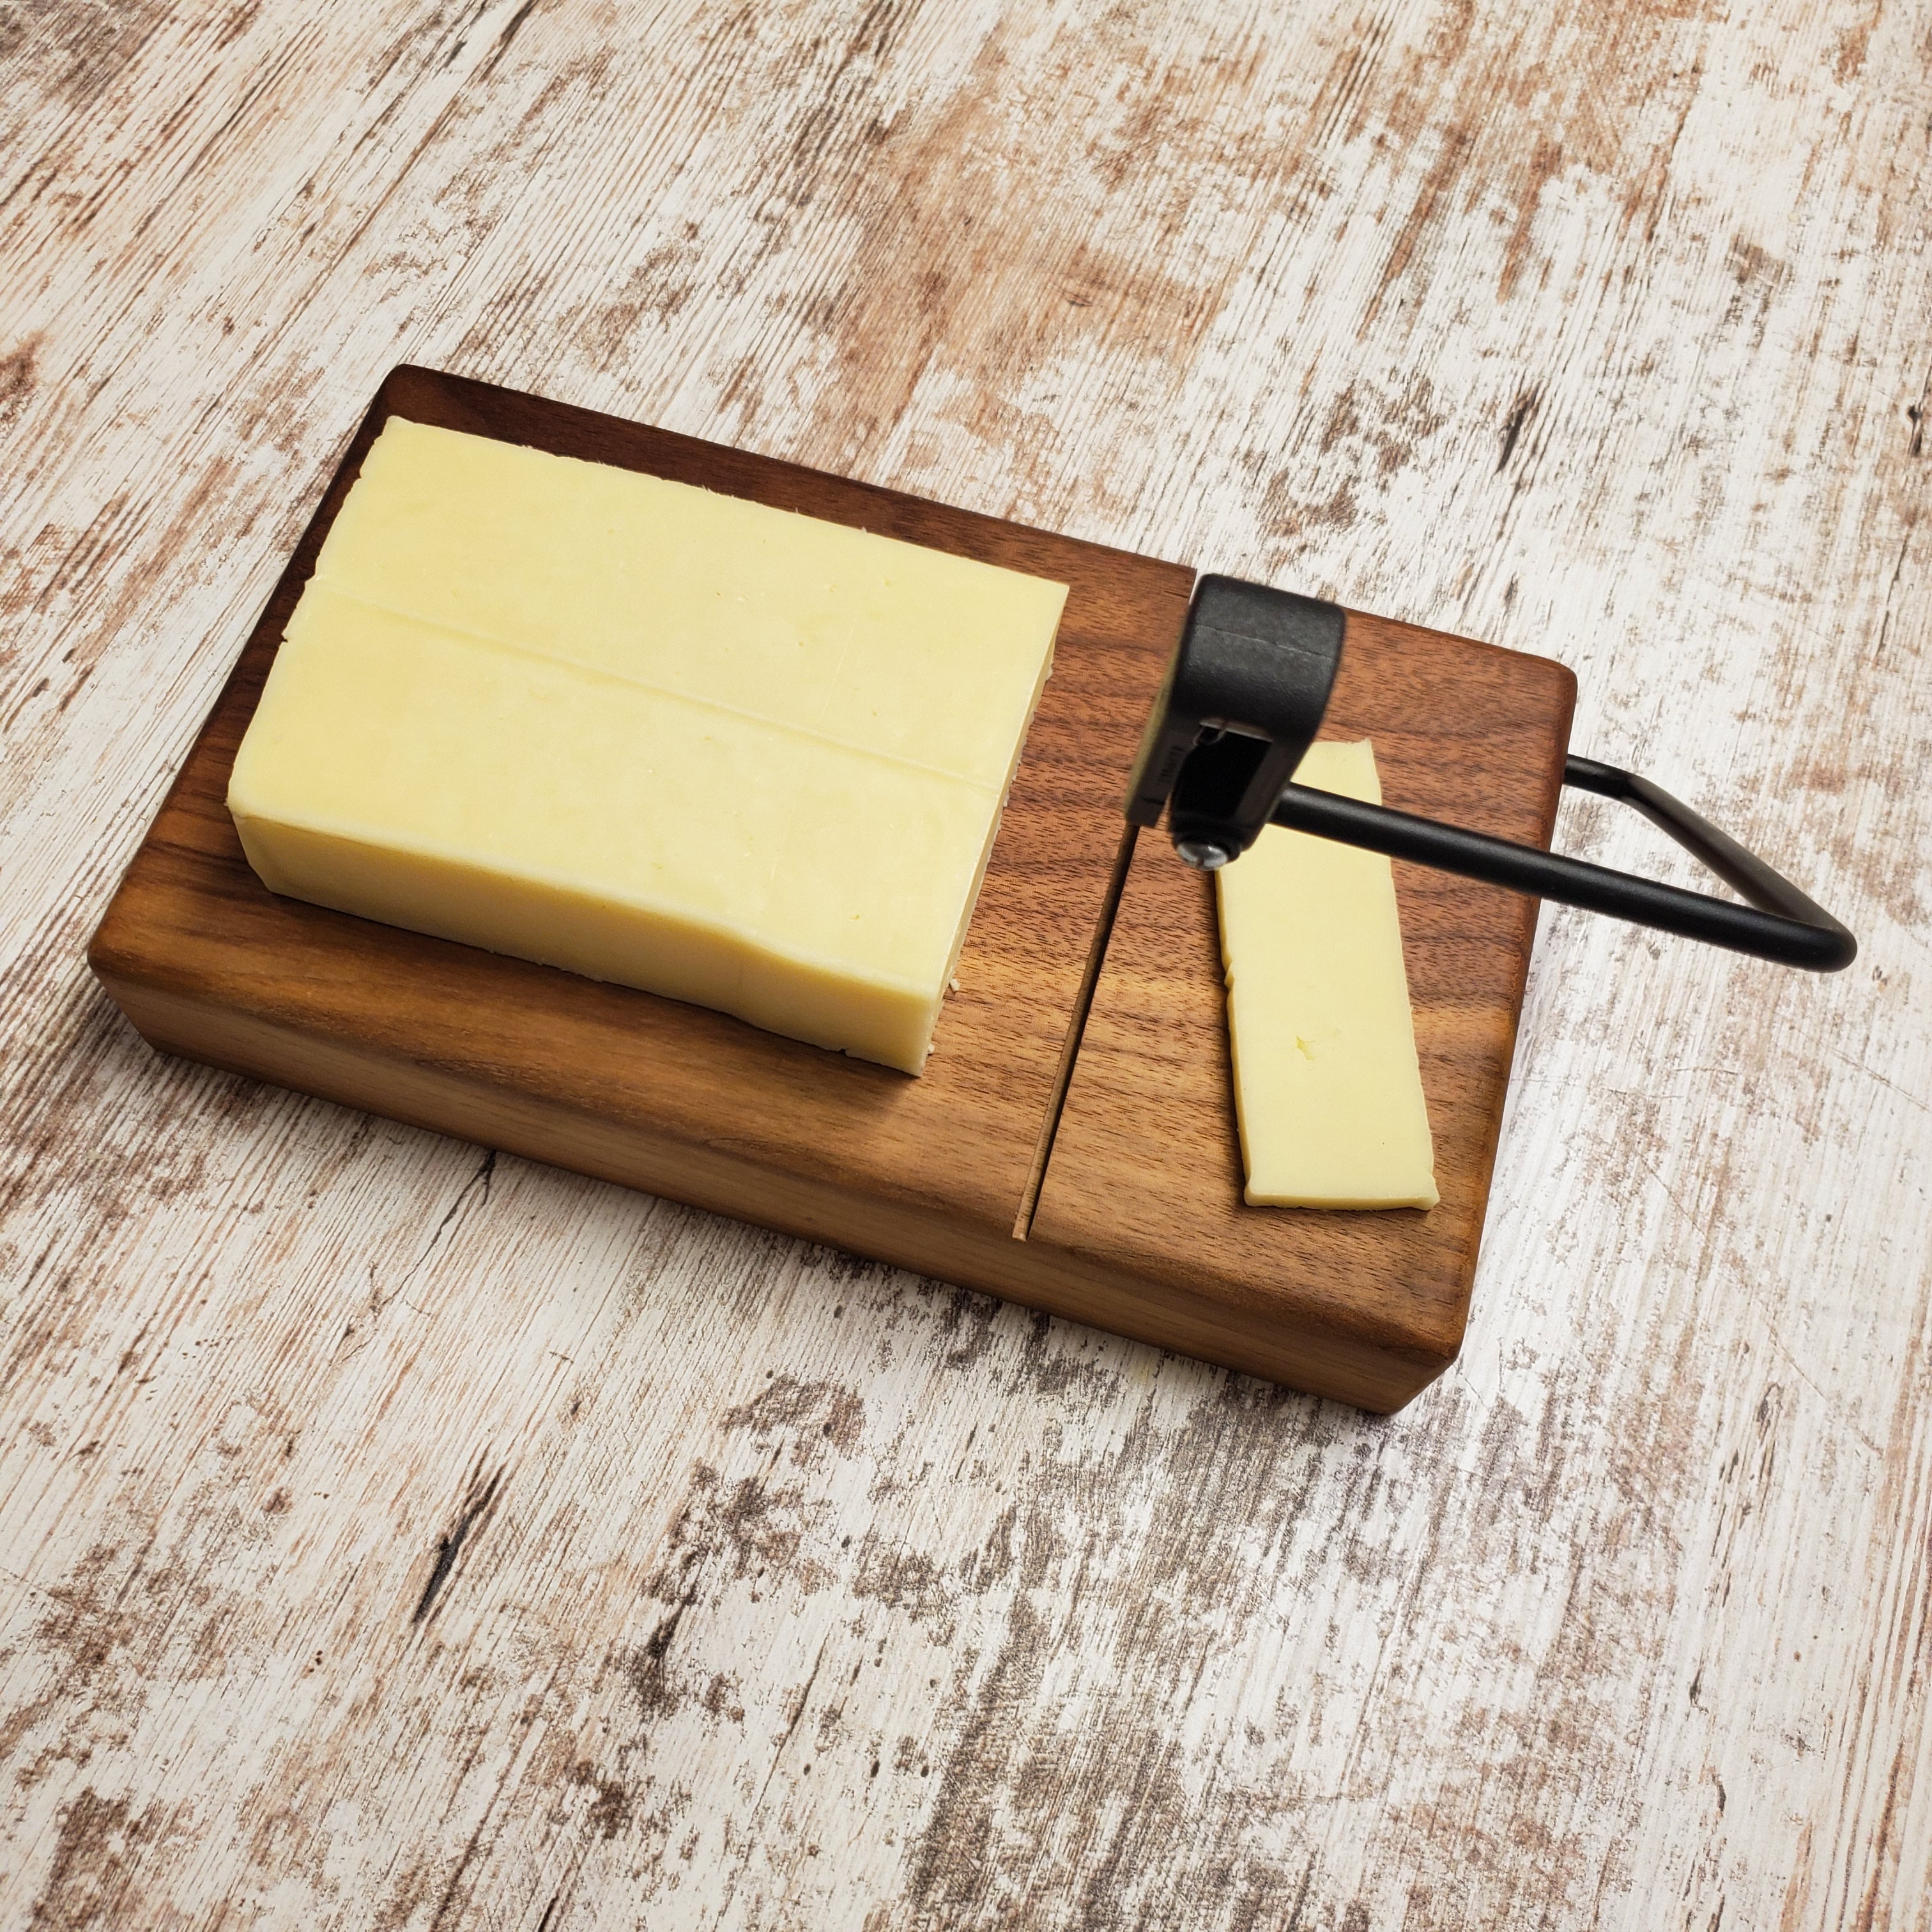 Solid walnut cheese slicers